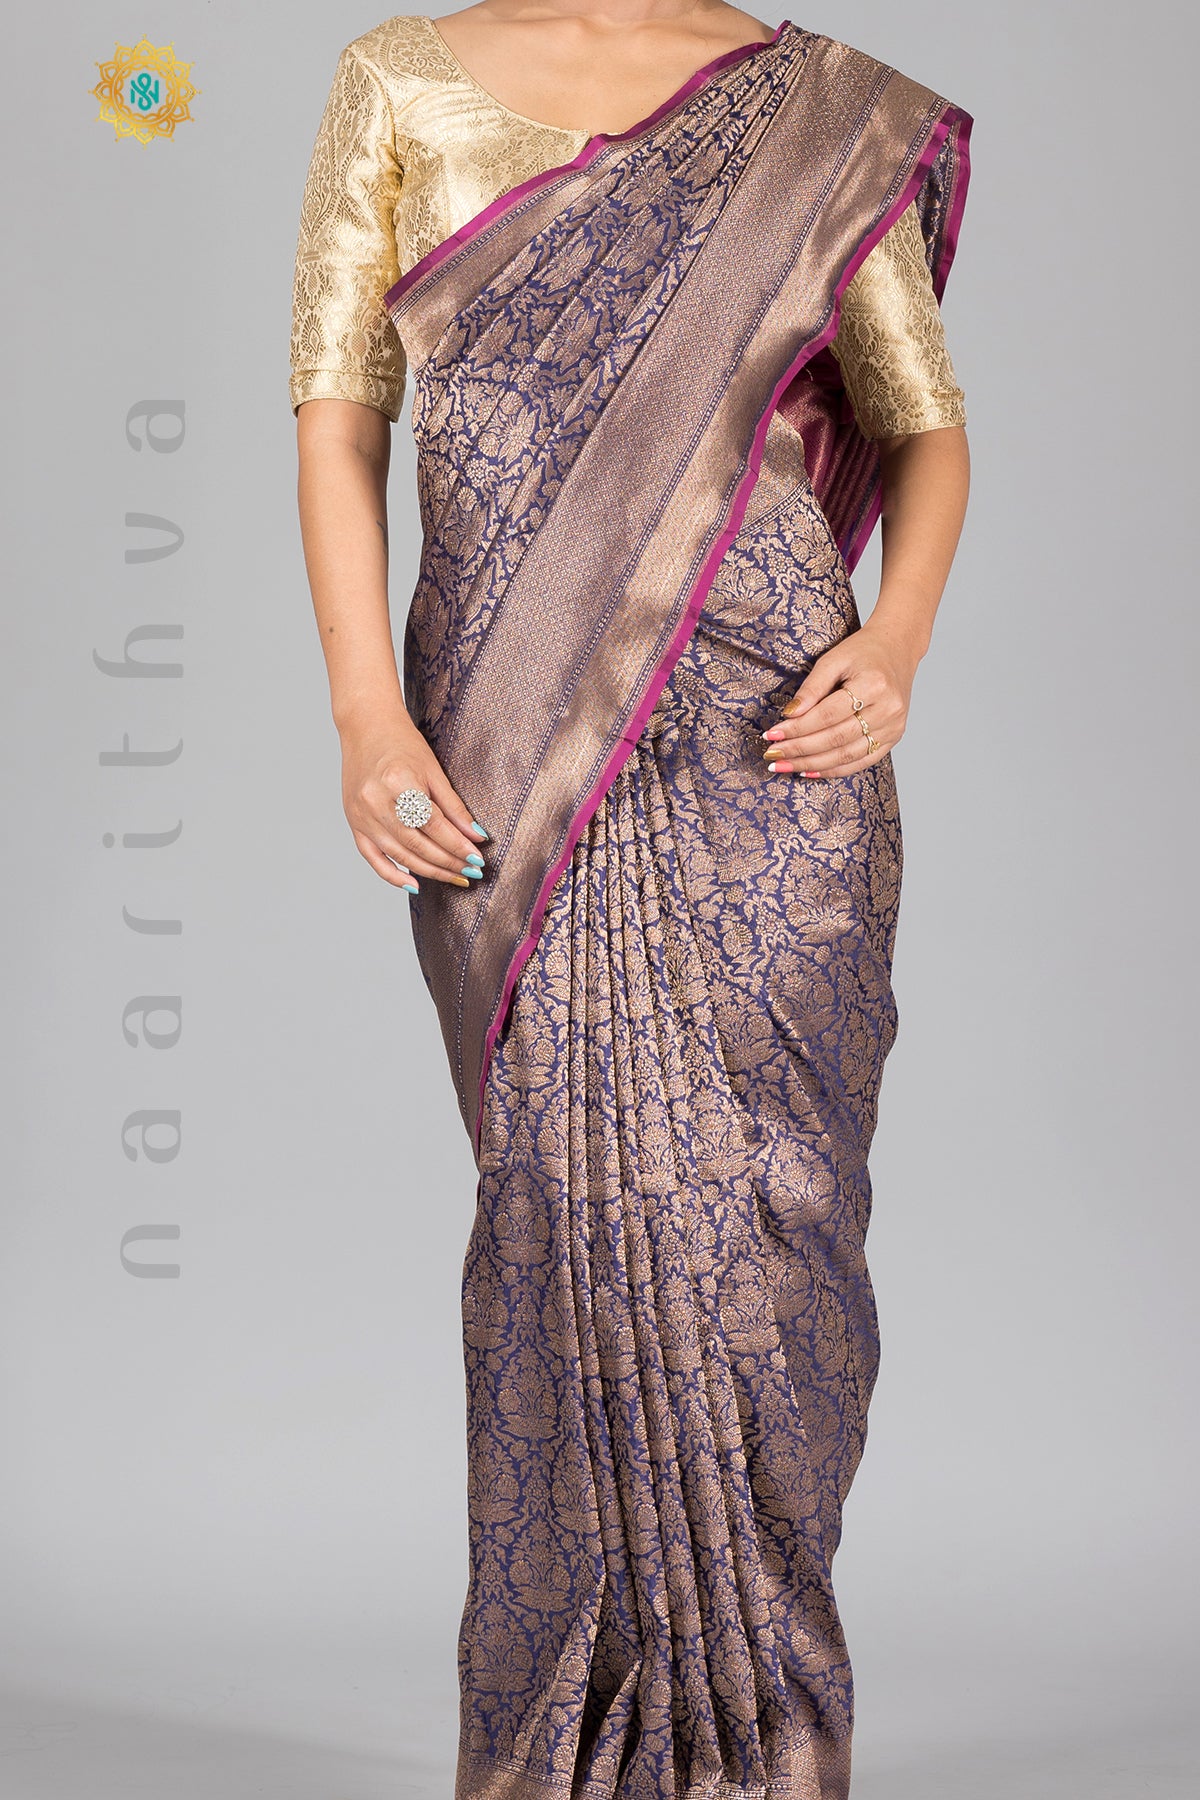 PURPLE WITH PINK - PURE HANDLOOM KATAN SILK WITH ANTIQUE ZARI WEAVES & CONTRAST BLOUSE